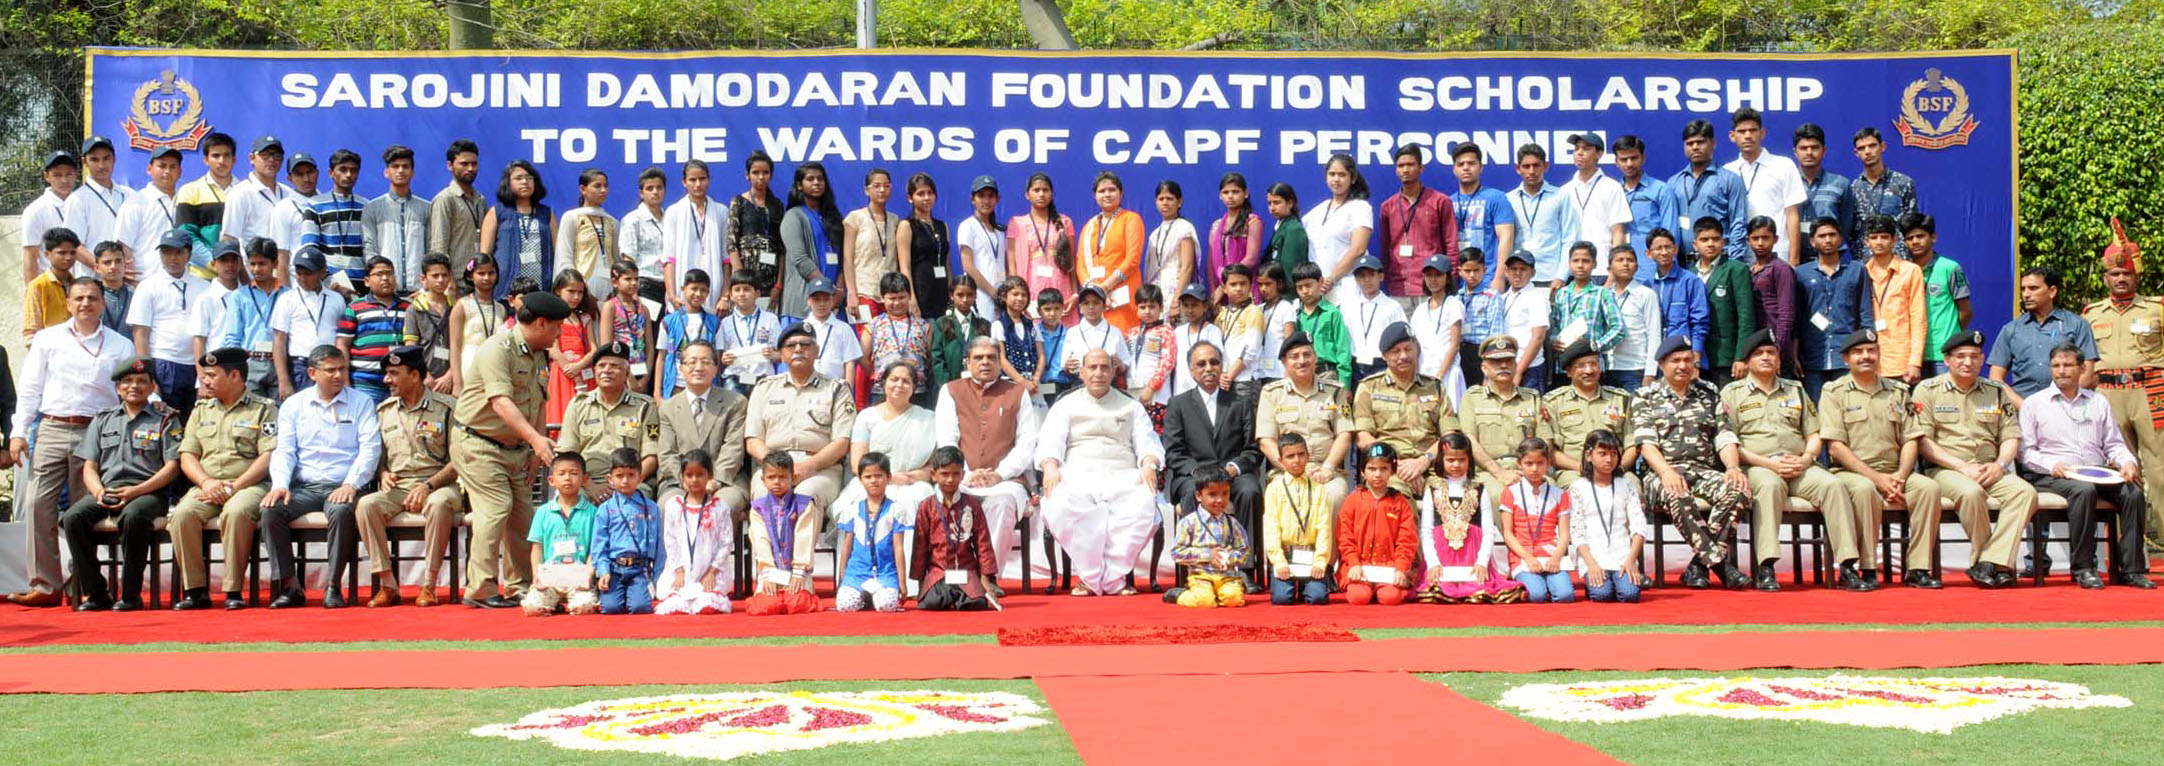 The Union Home Minister, Shri Rajnath Singh with the awardees of the Sarojini Damodaran Foundation Scholarship, at a function, in New Delhi on March 18, 2016. 	The Minister of State for Home Affairs, Shri Haribhai Parthibhai Chaudhary and other dignitaries are also seen.